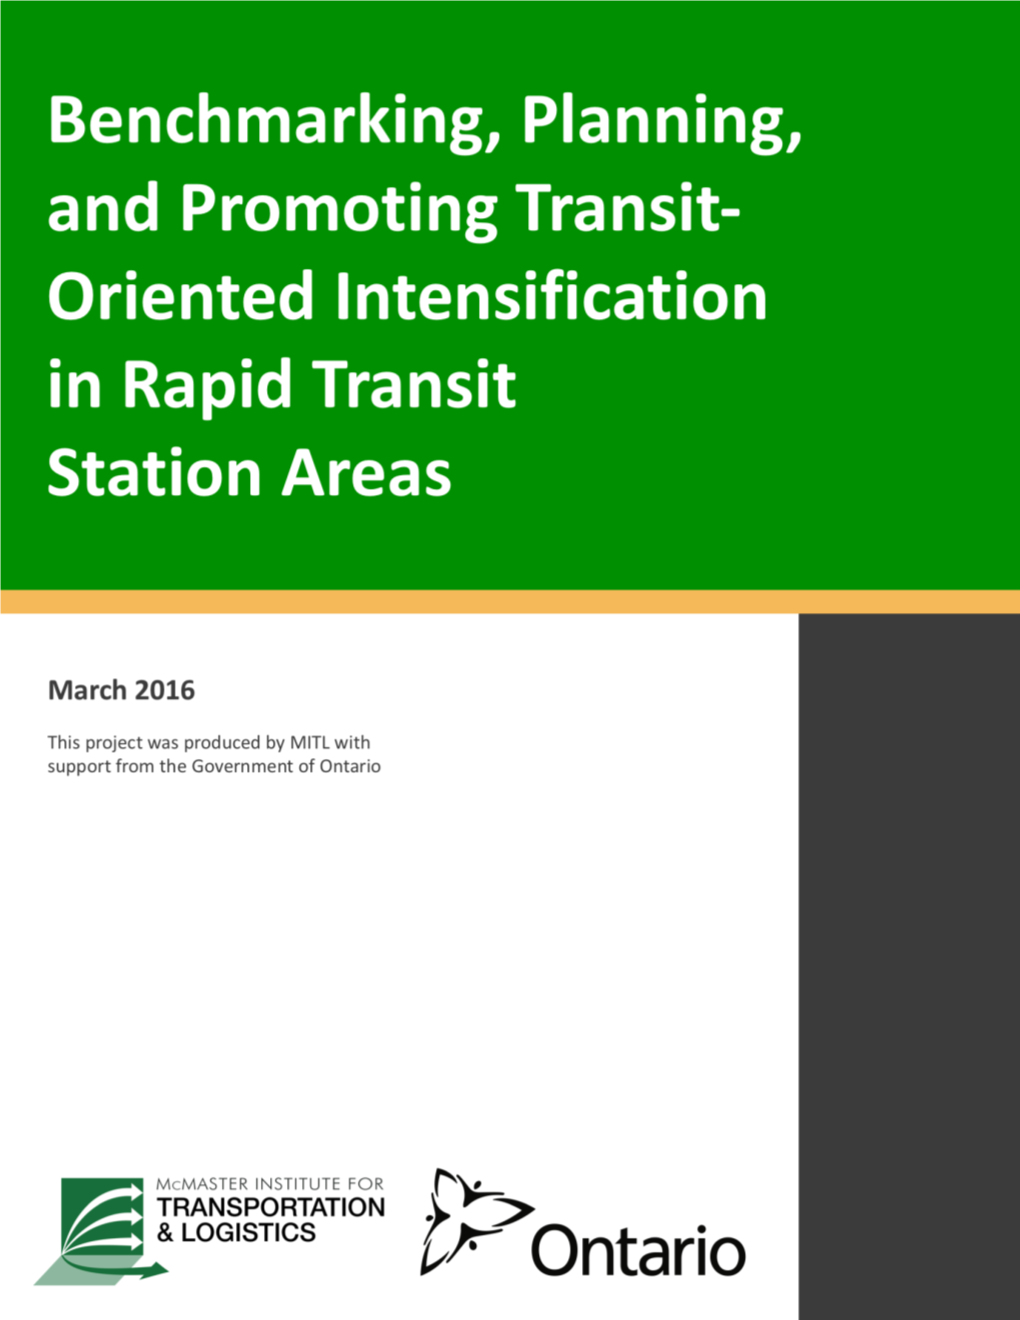 Benchmarking, Planning, and Promoting Transit- Oriented Intensification in Rapid Transit Station Areas